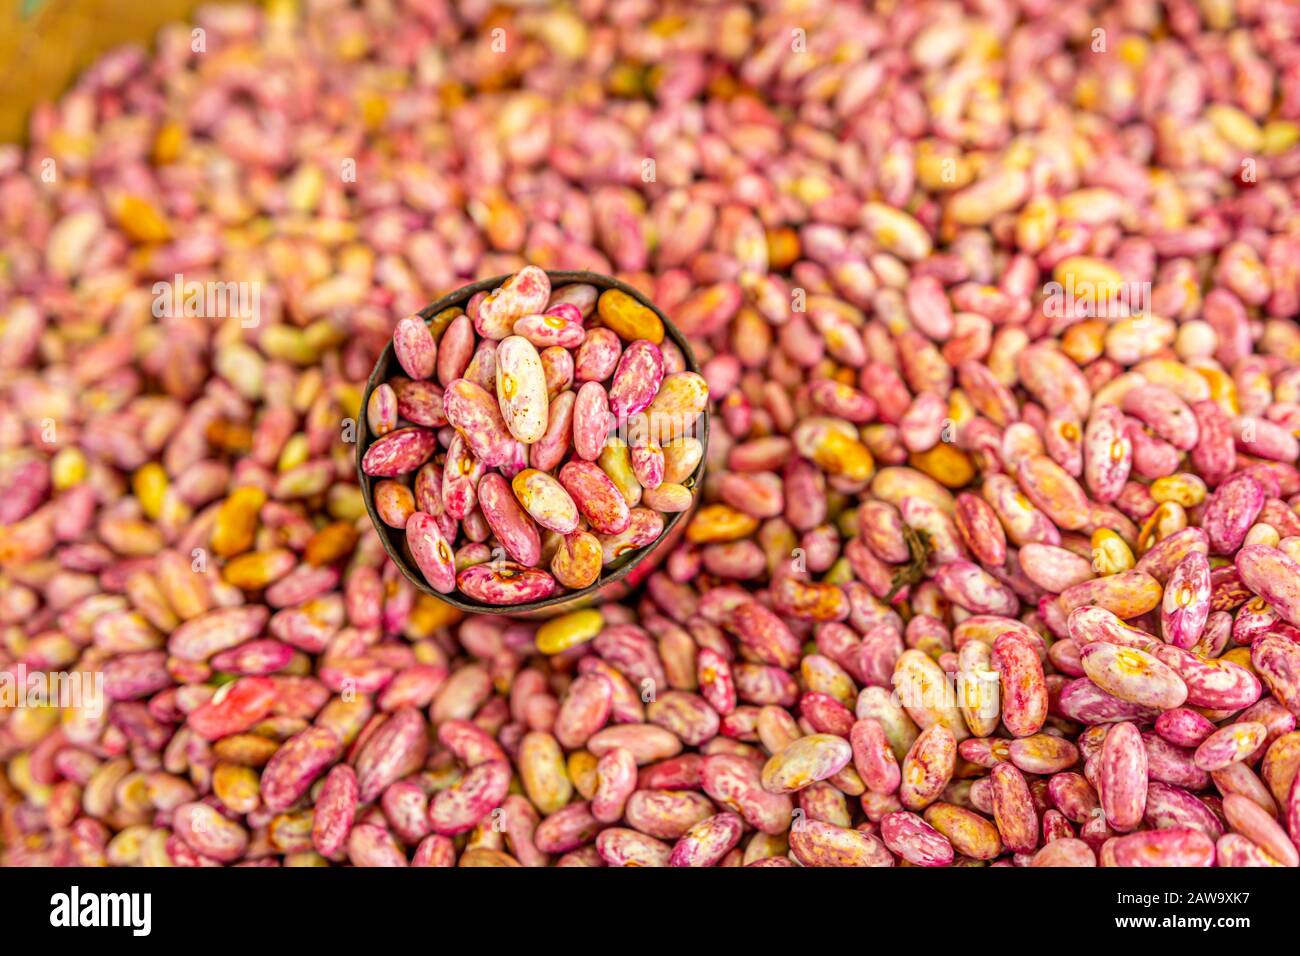 Red kidney beans in tin can, local market Stock Photo